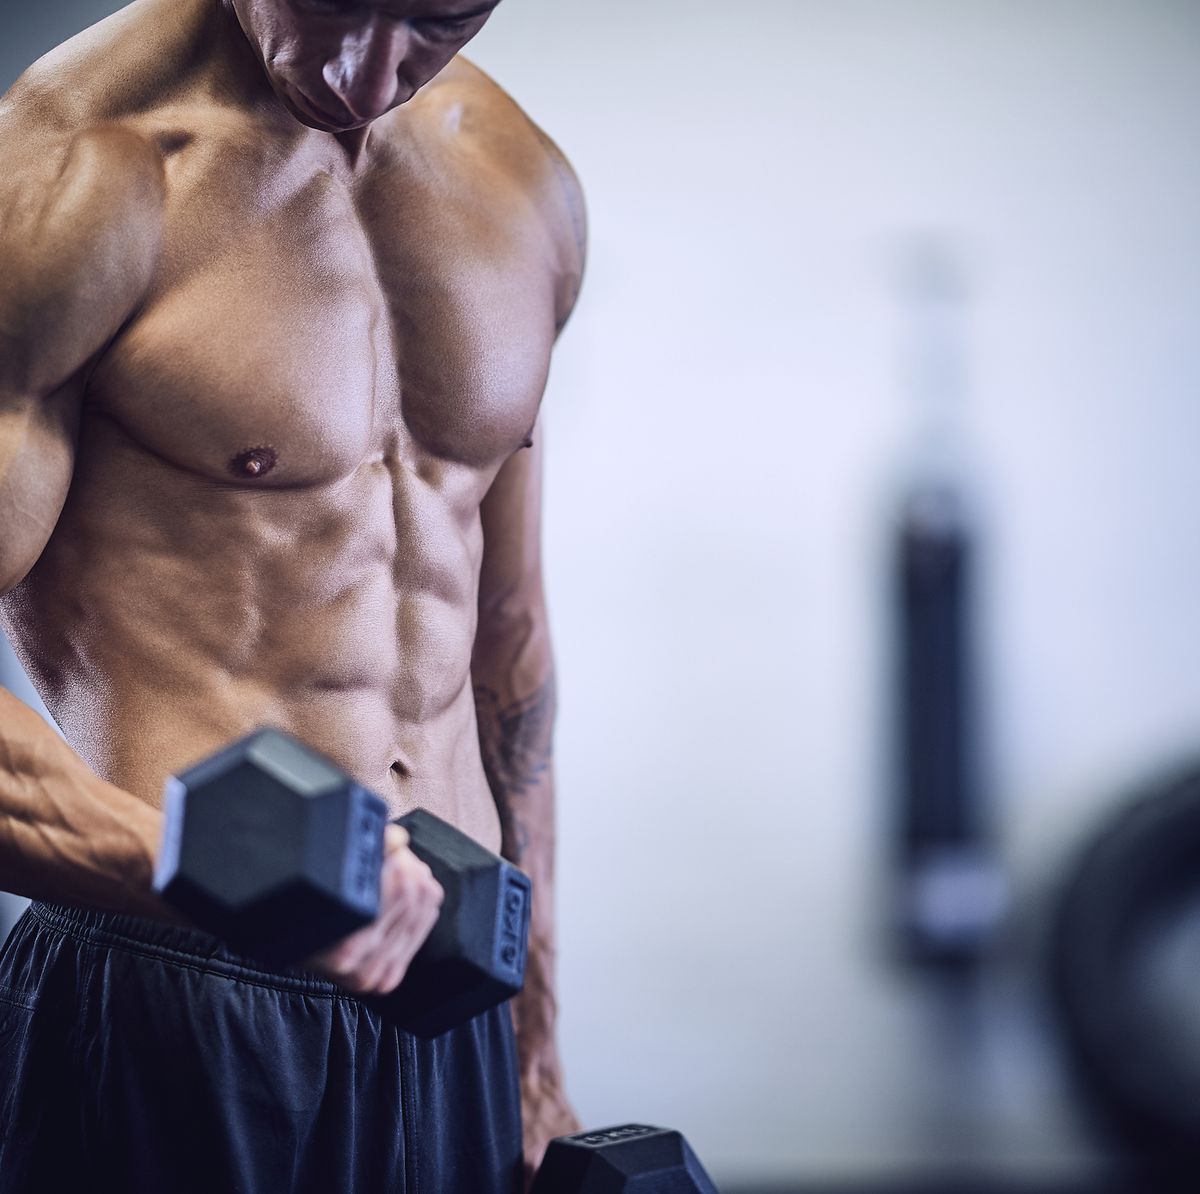 20 Ab Exercises With Weights for a Shredded Six-Pack - Men's Journal